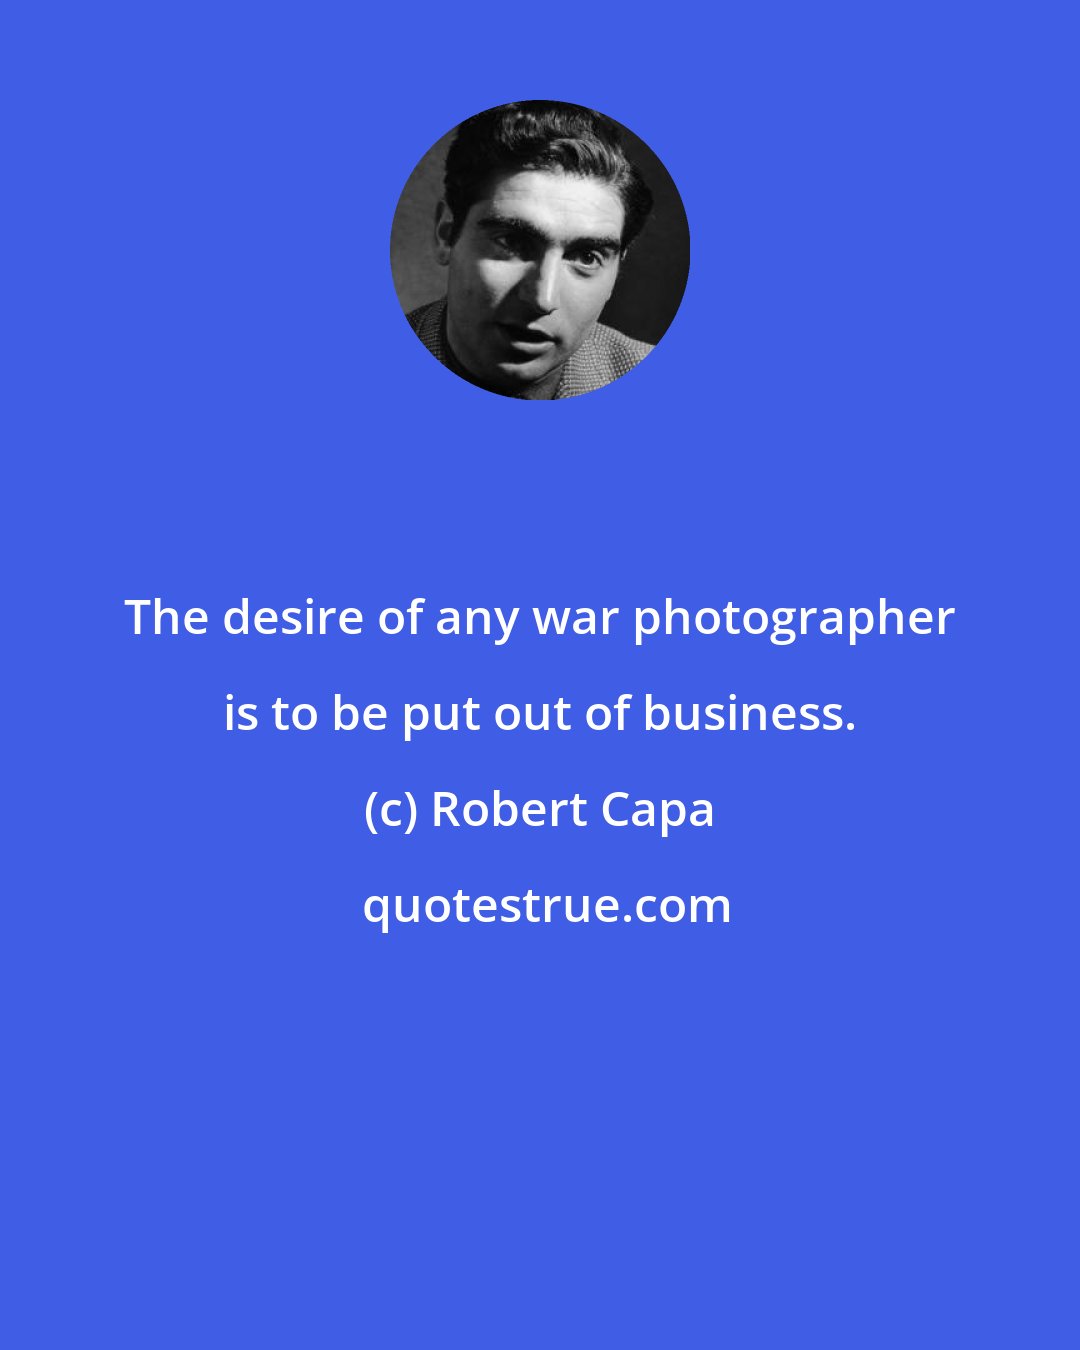 Robert Capa: The desire of any war photographer is to be put out of business.